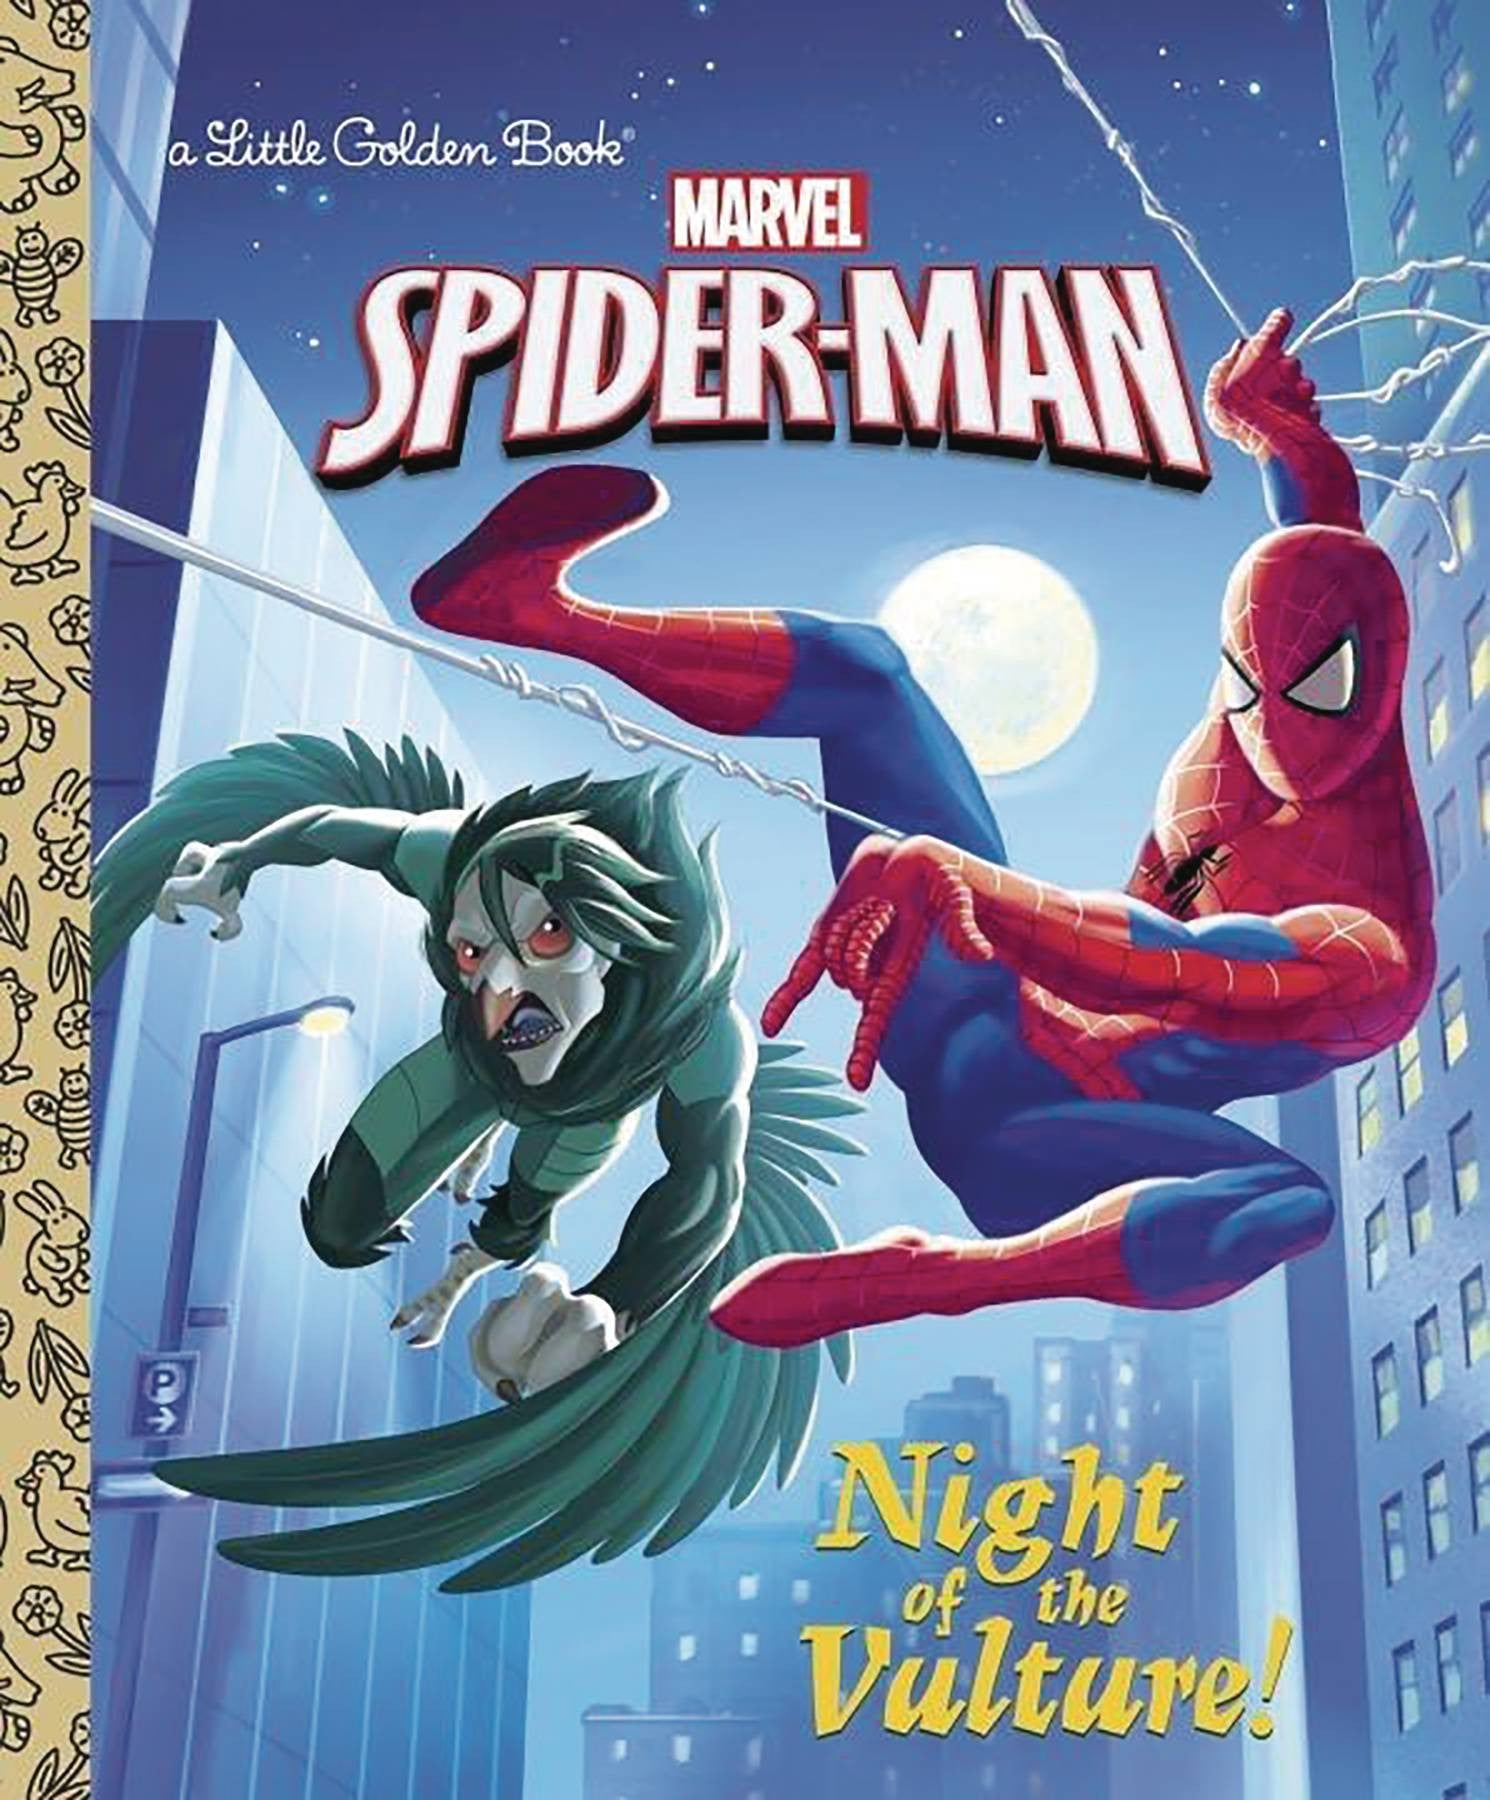 Spider　Vulture　Man　Little　the　Golden　Book　of　Night　Uncanny!